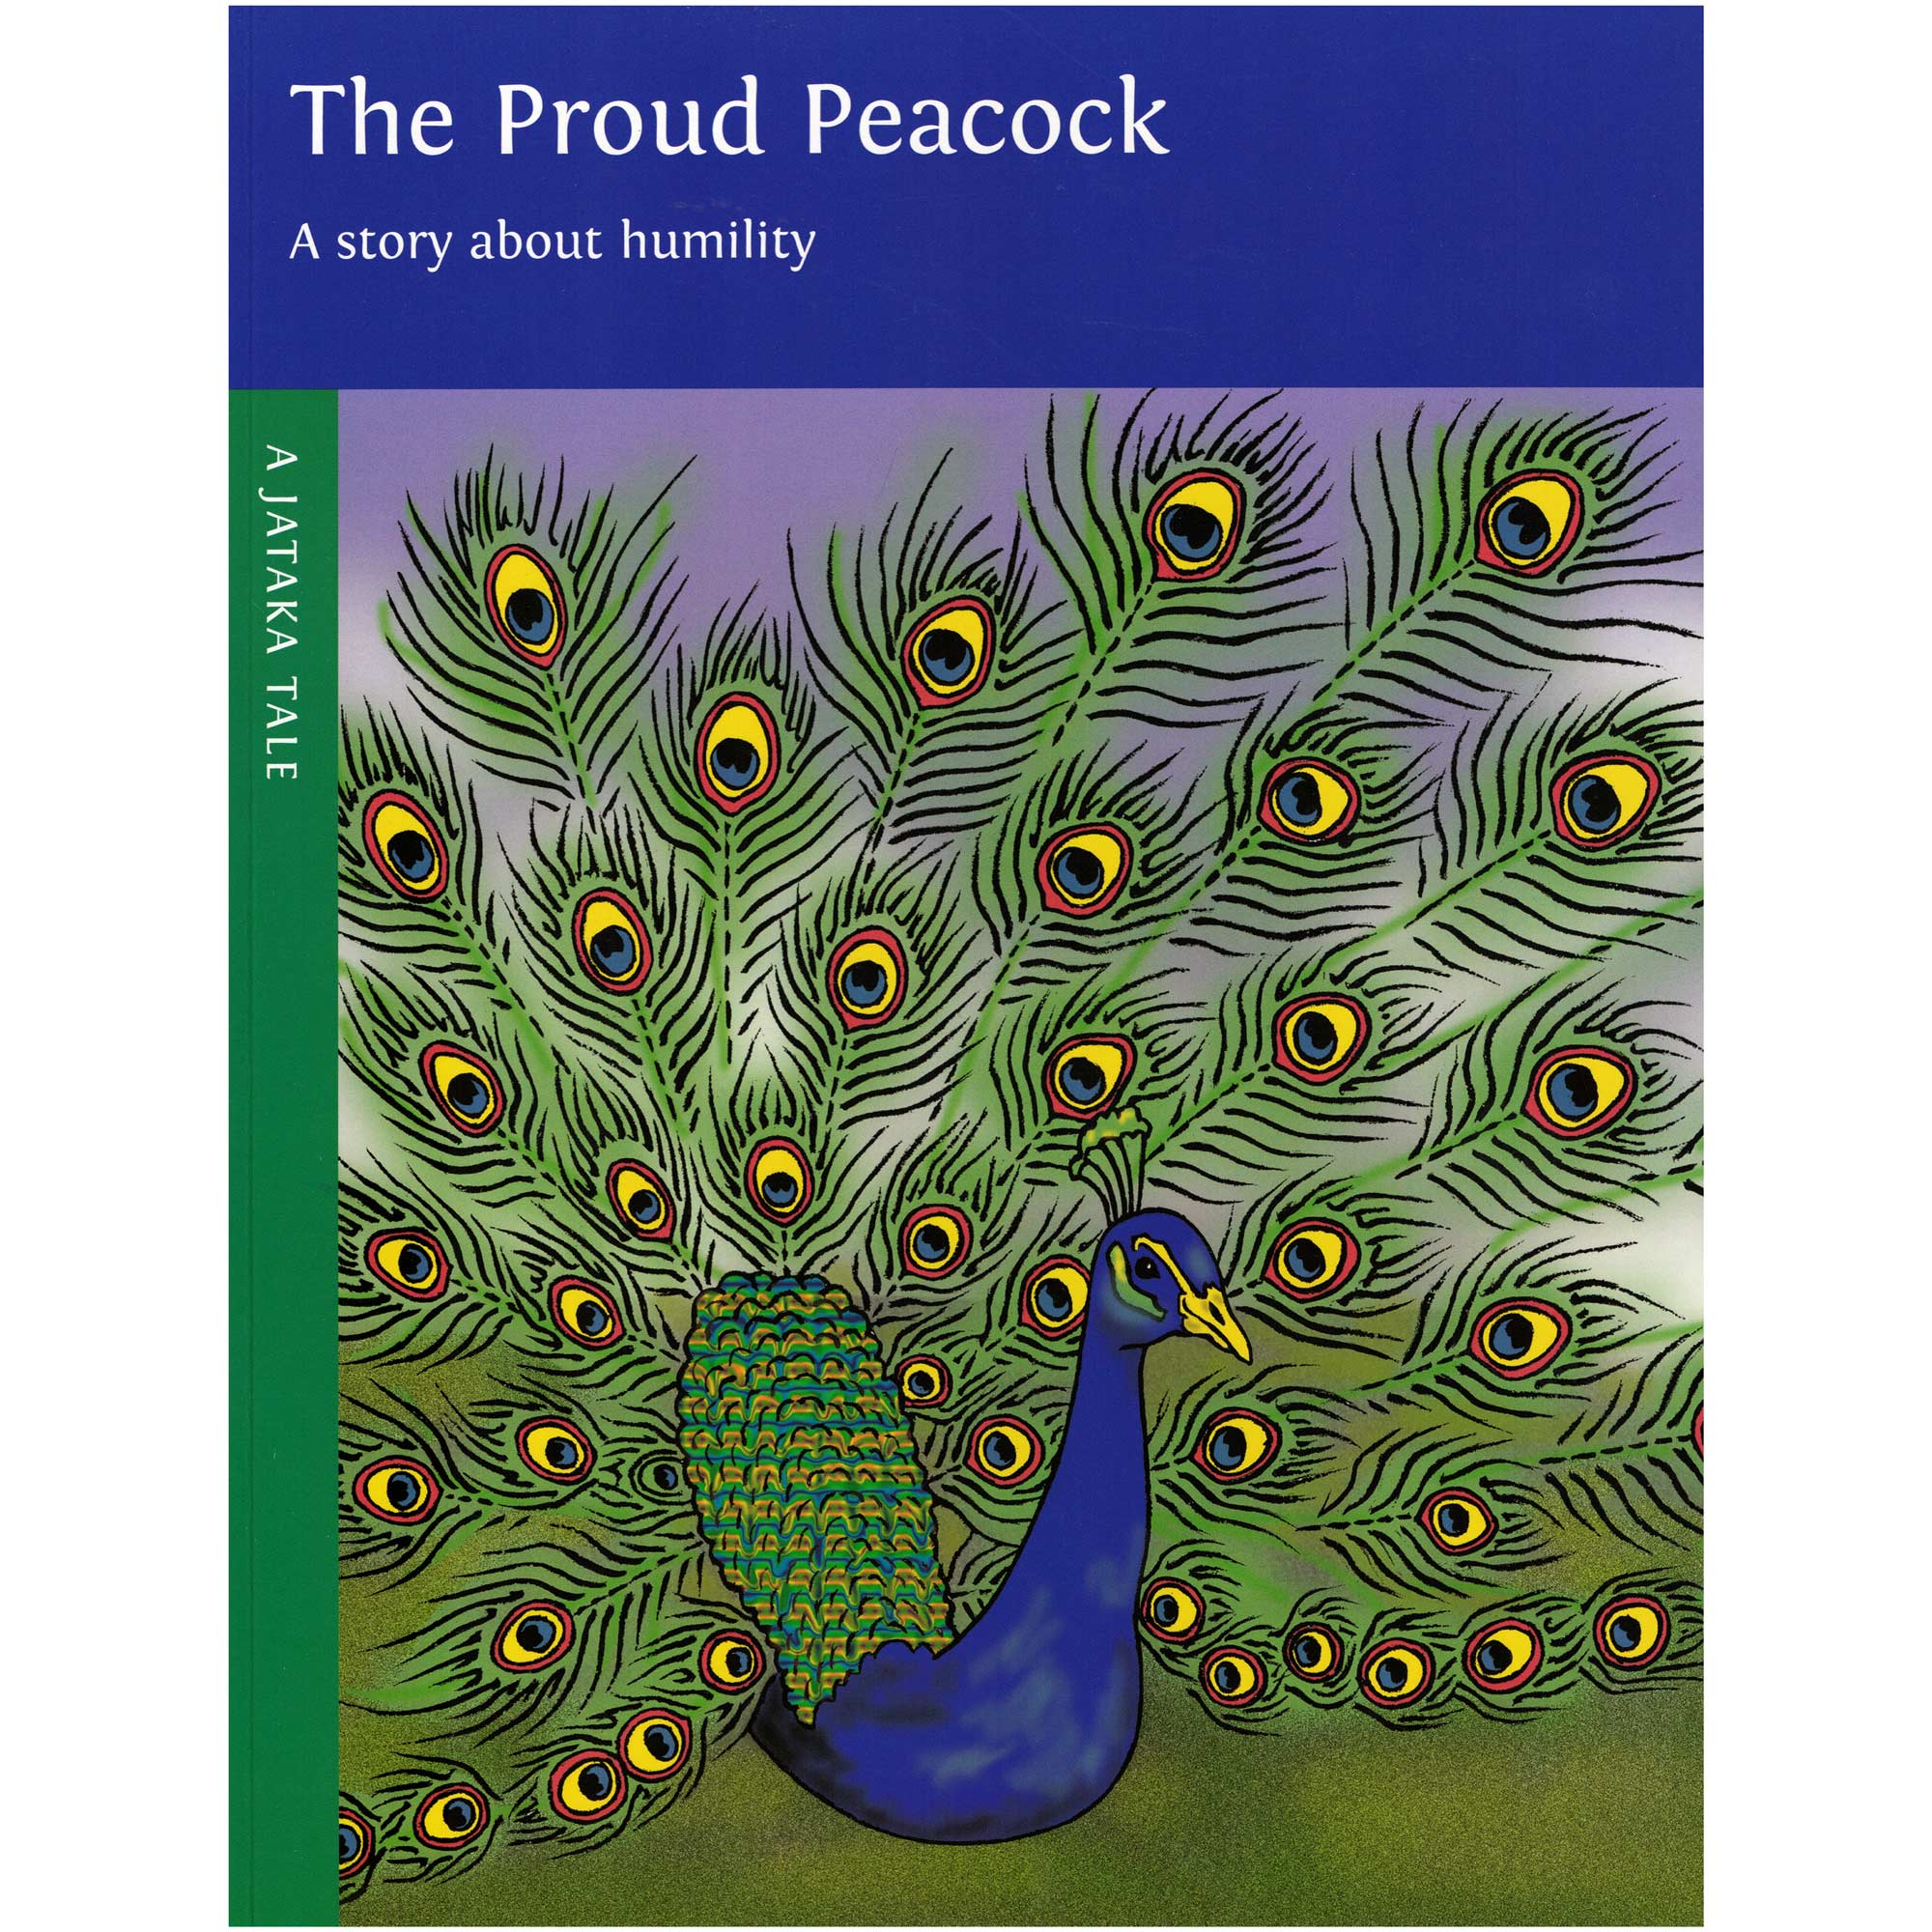 The Proud Peacock